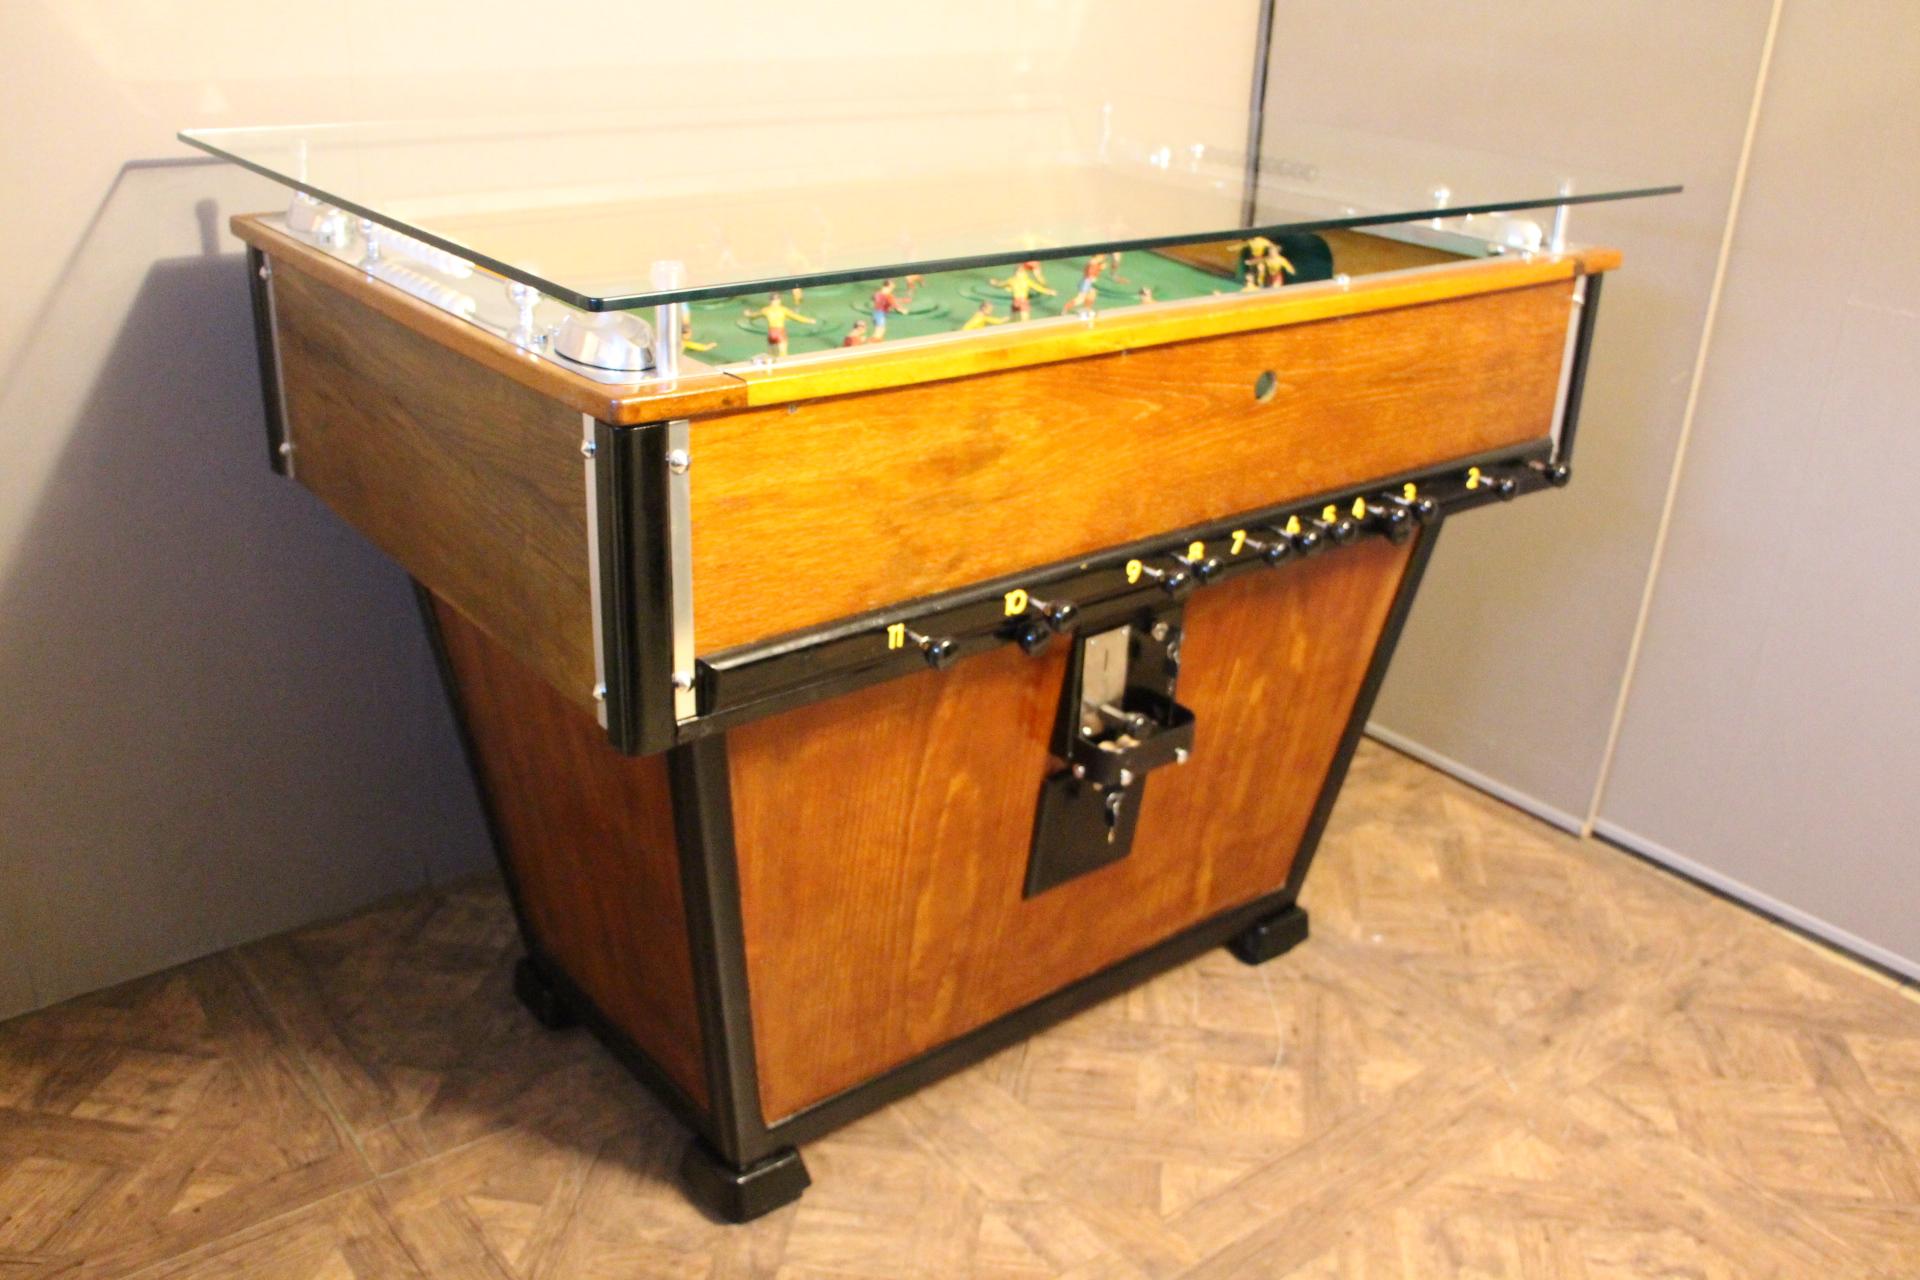 This foosball is very rare because its players spin around on a turning plate to reach the ball.
Green field. Four aluminum ashtrays.
Thanks to its glass top, it could be used as a bar counter or a counter table.
It is an amazing piece and a very